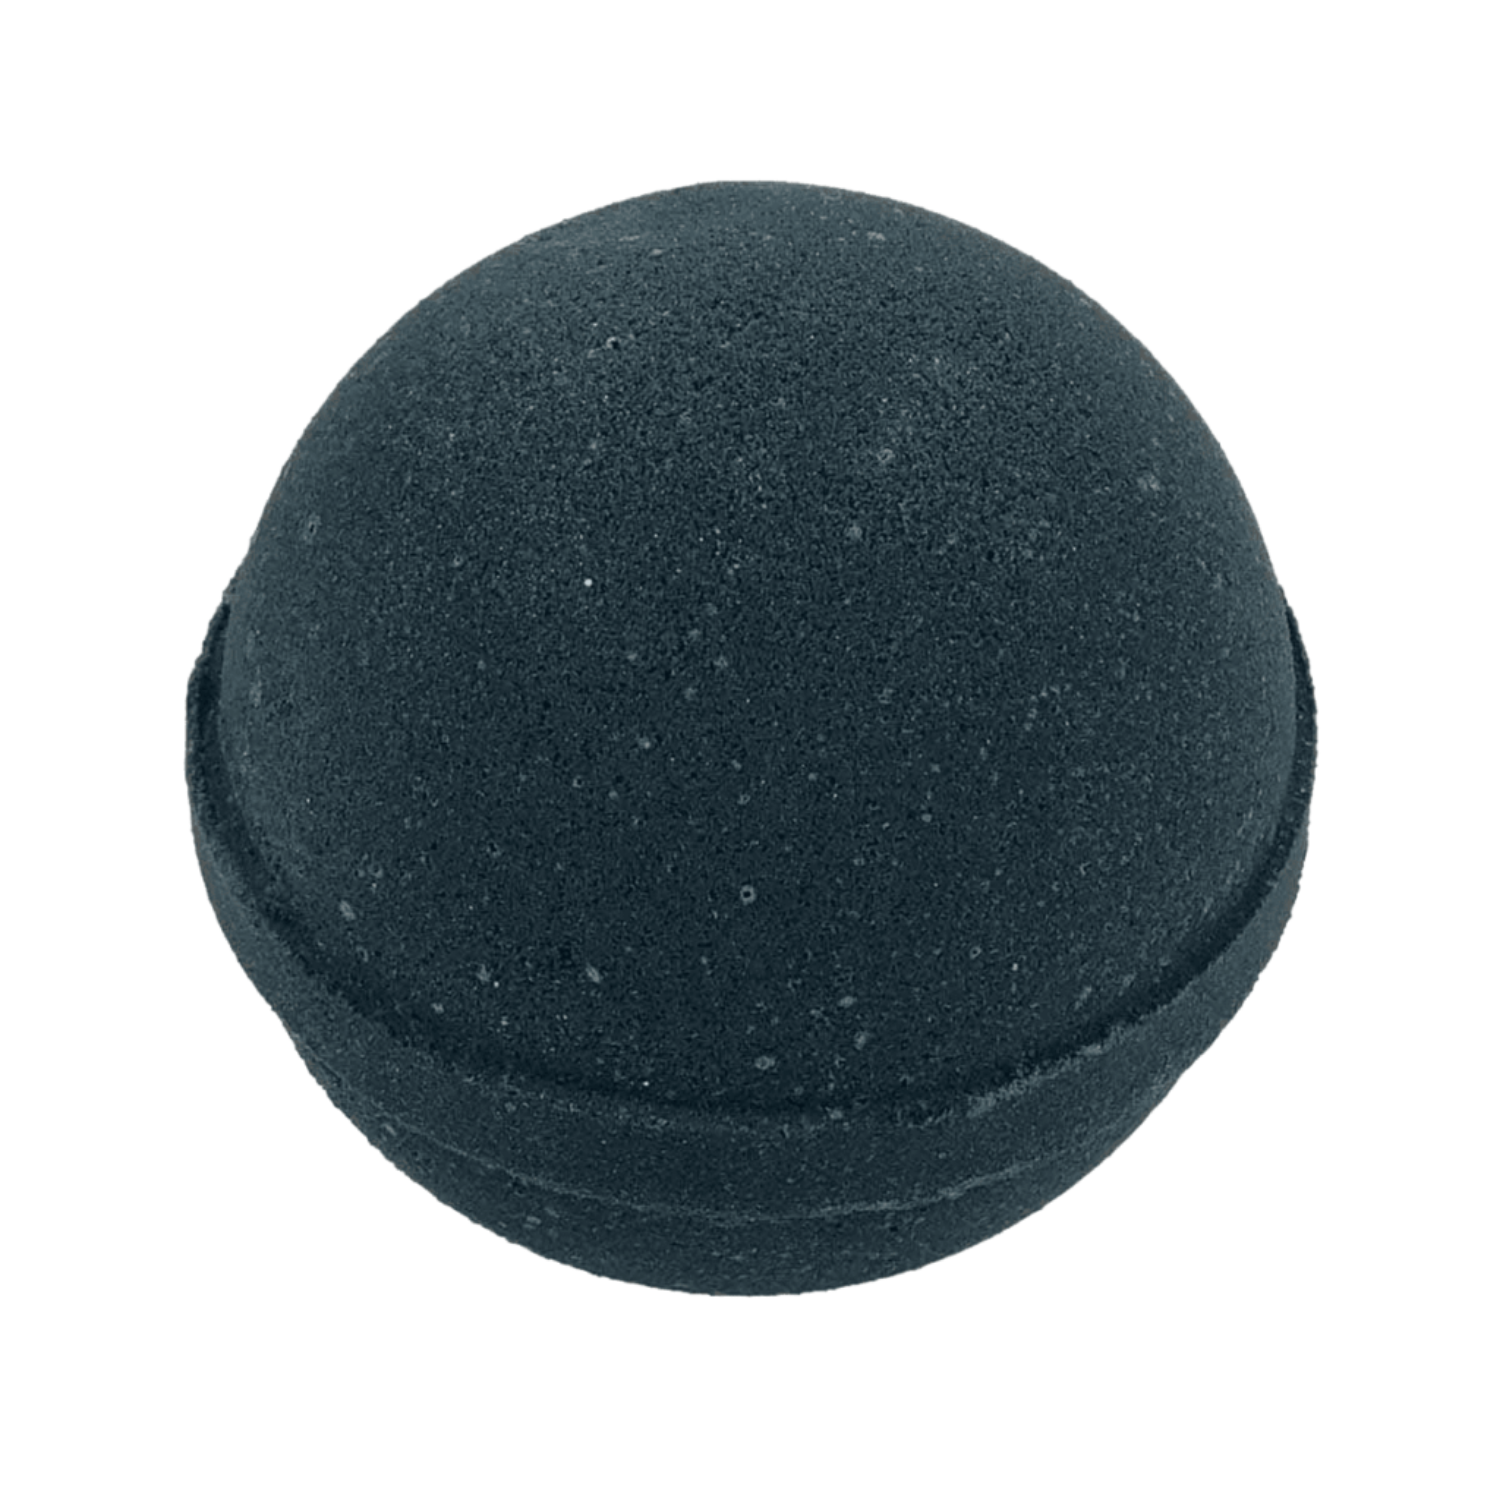 Activated Charcoal Bath Bomb